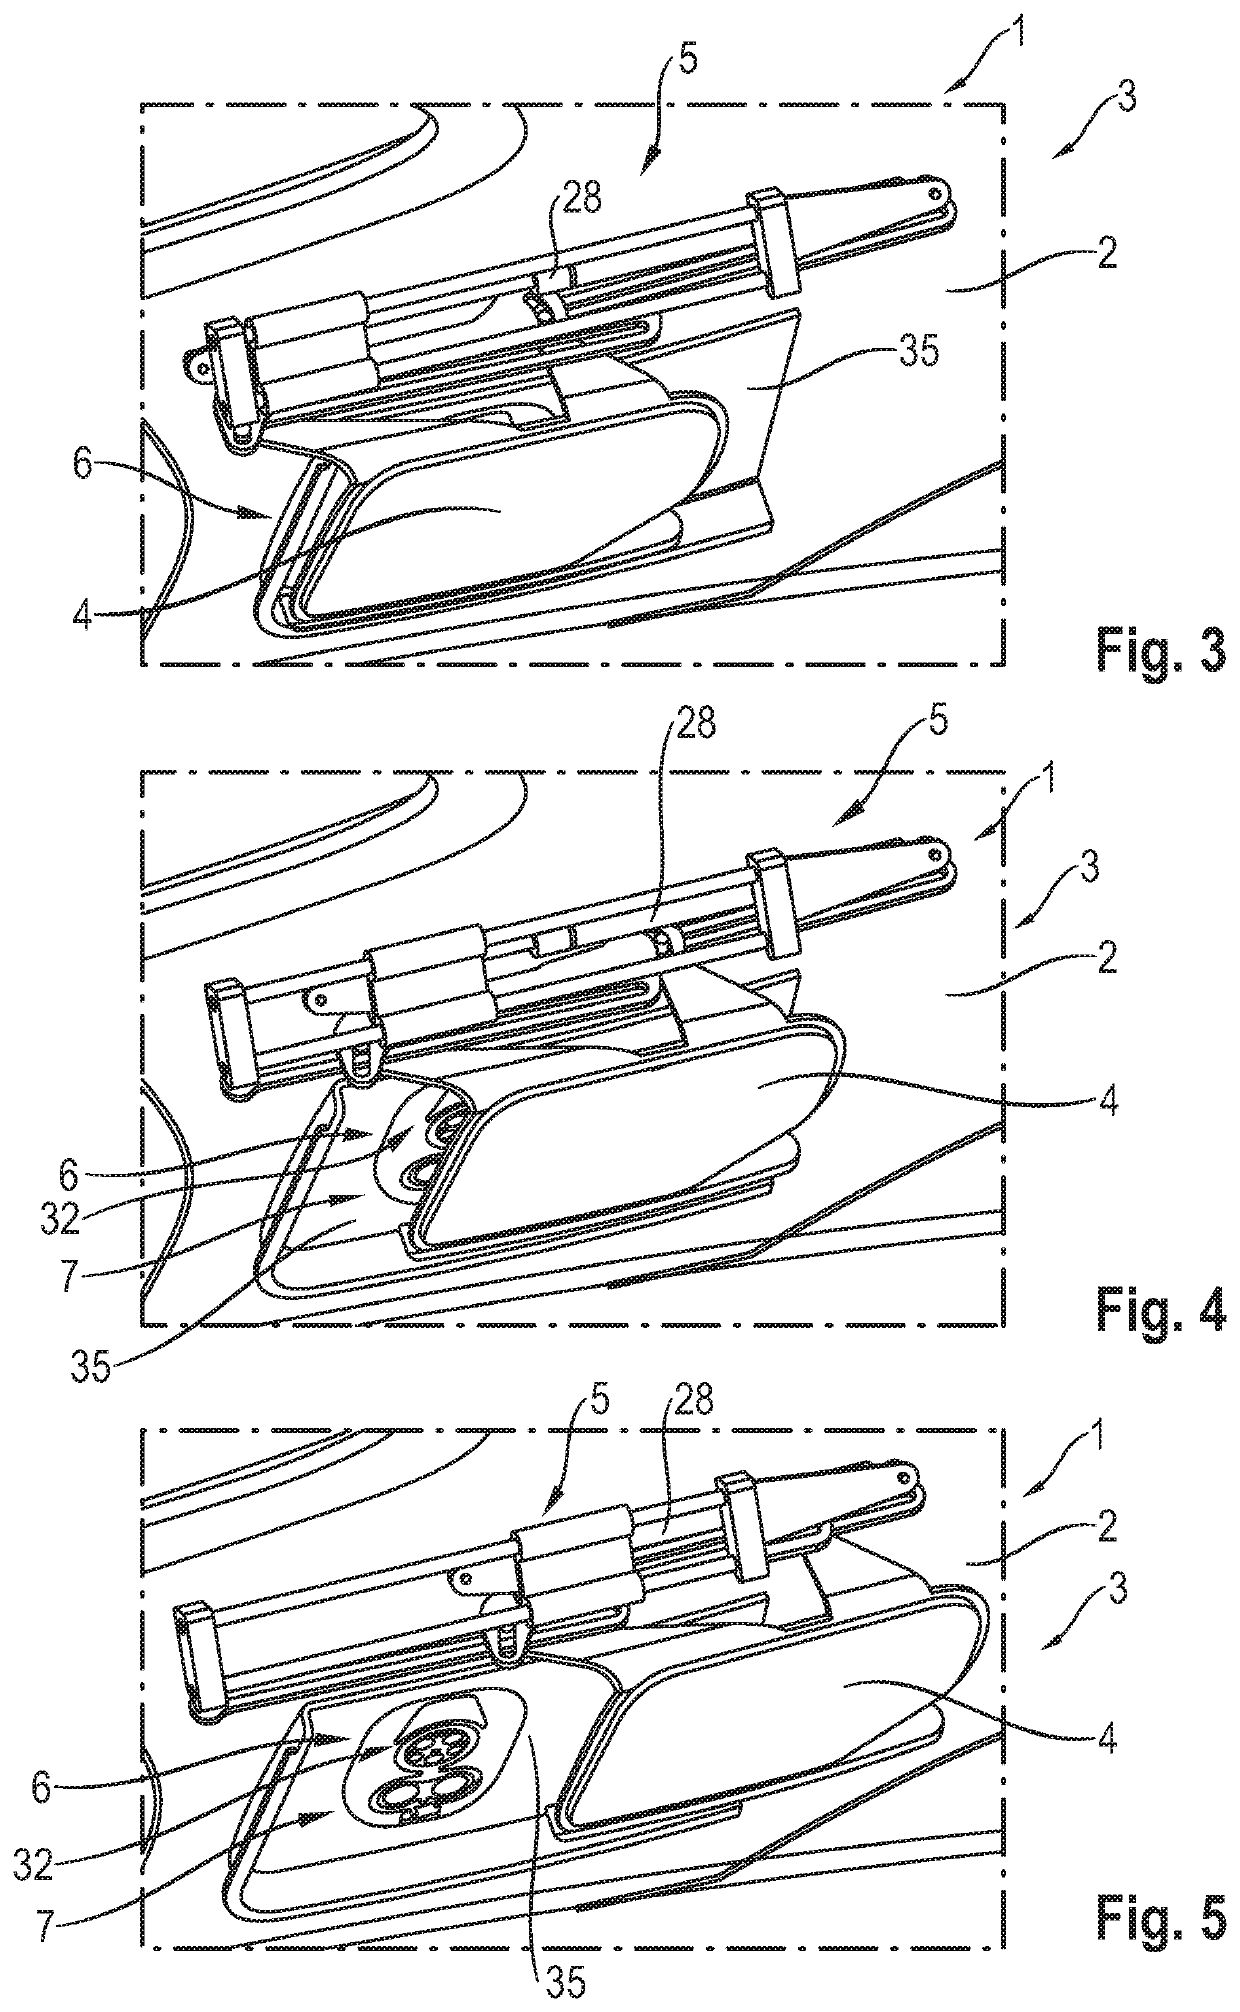 Cover apparatus for a motor vehicle body